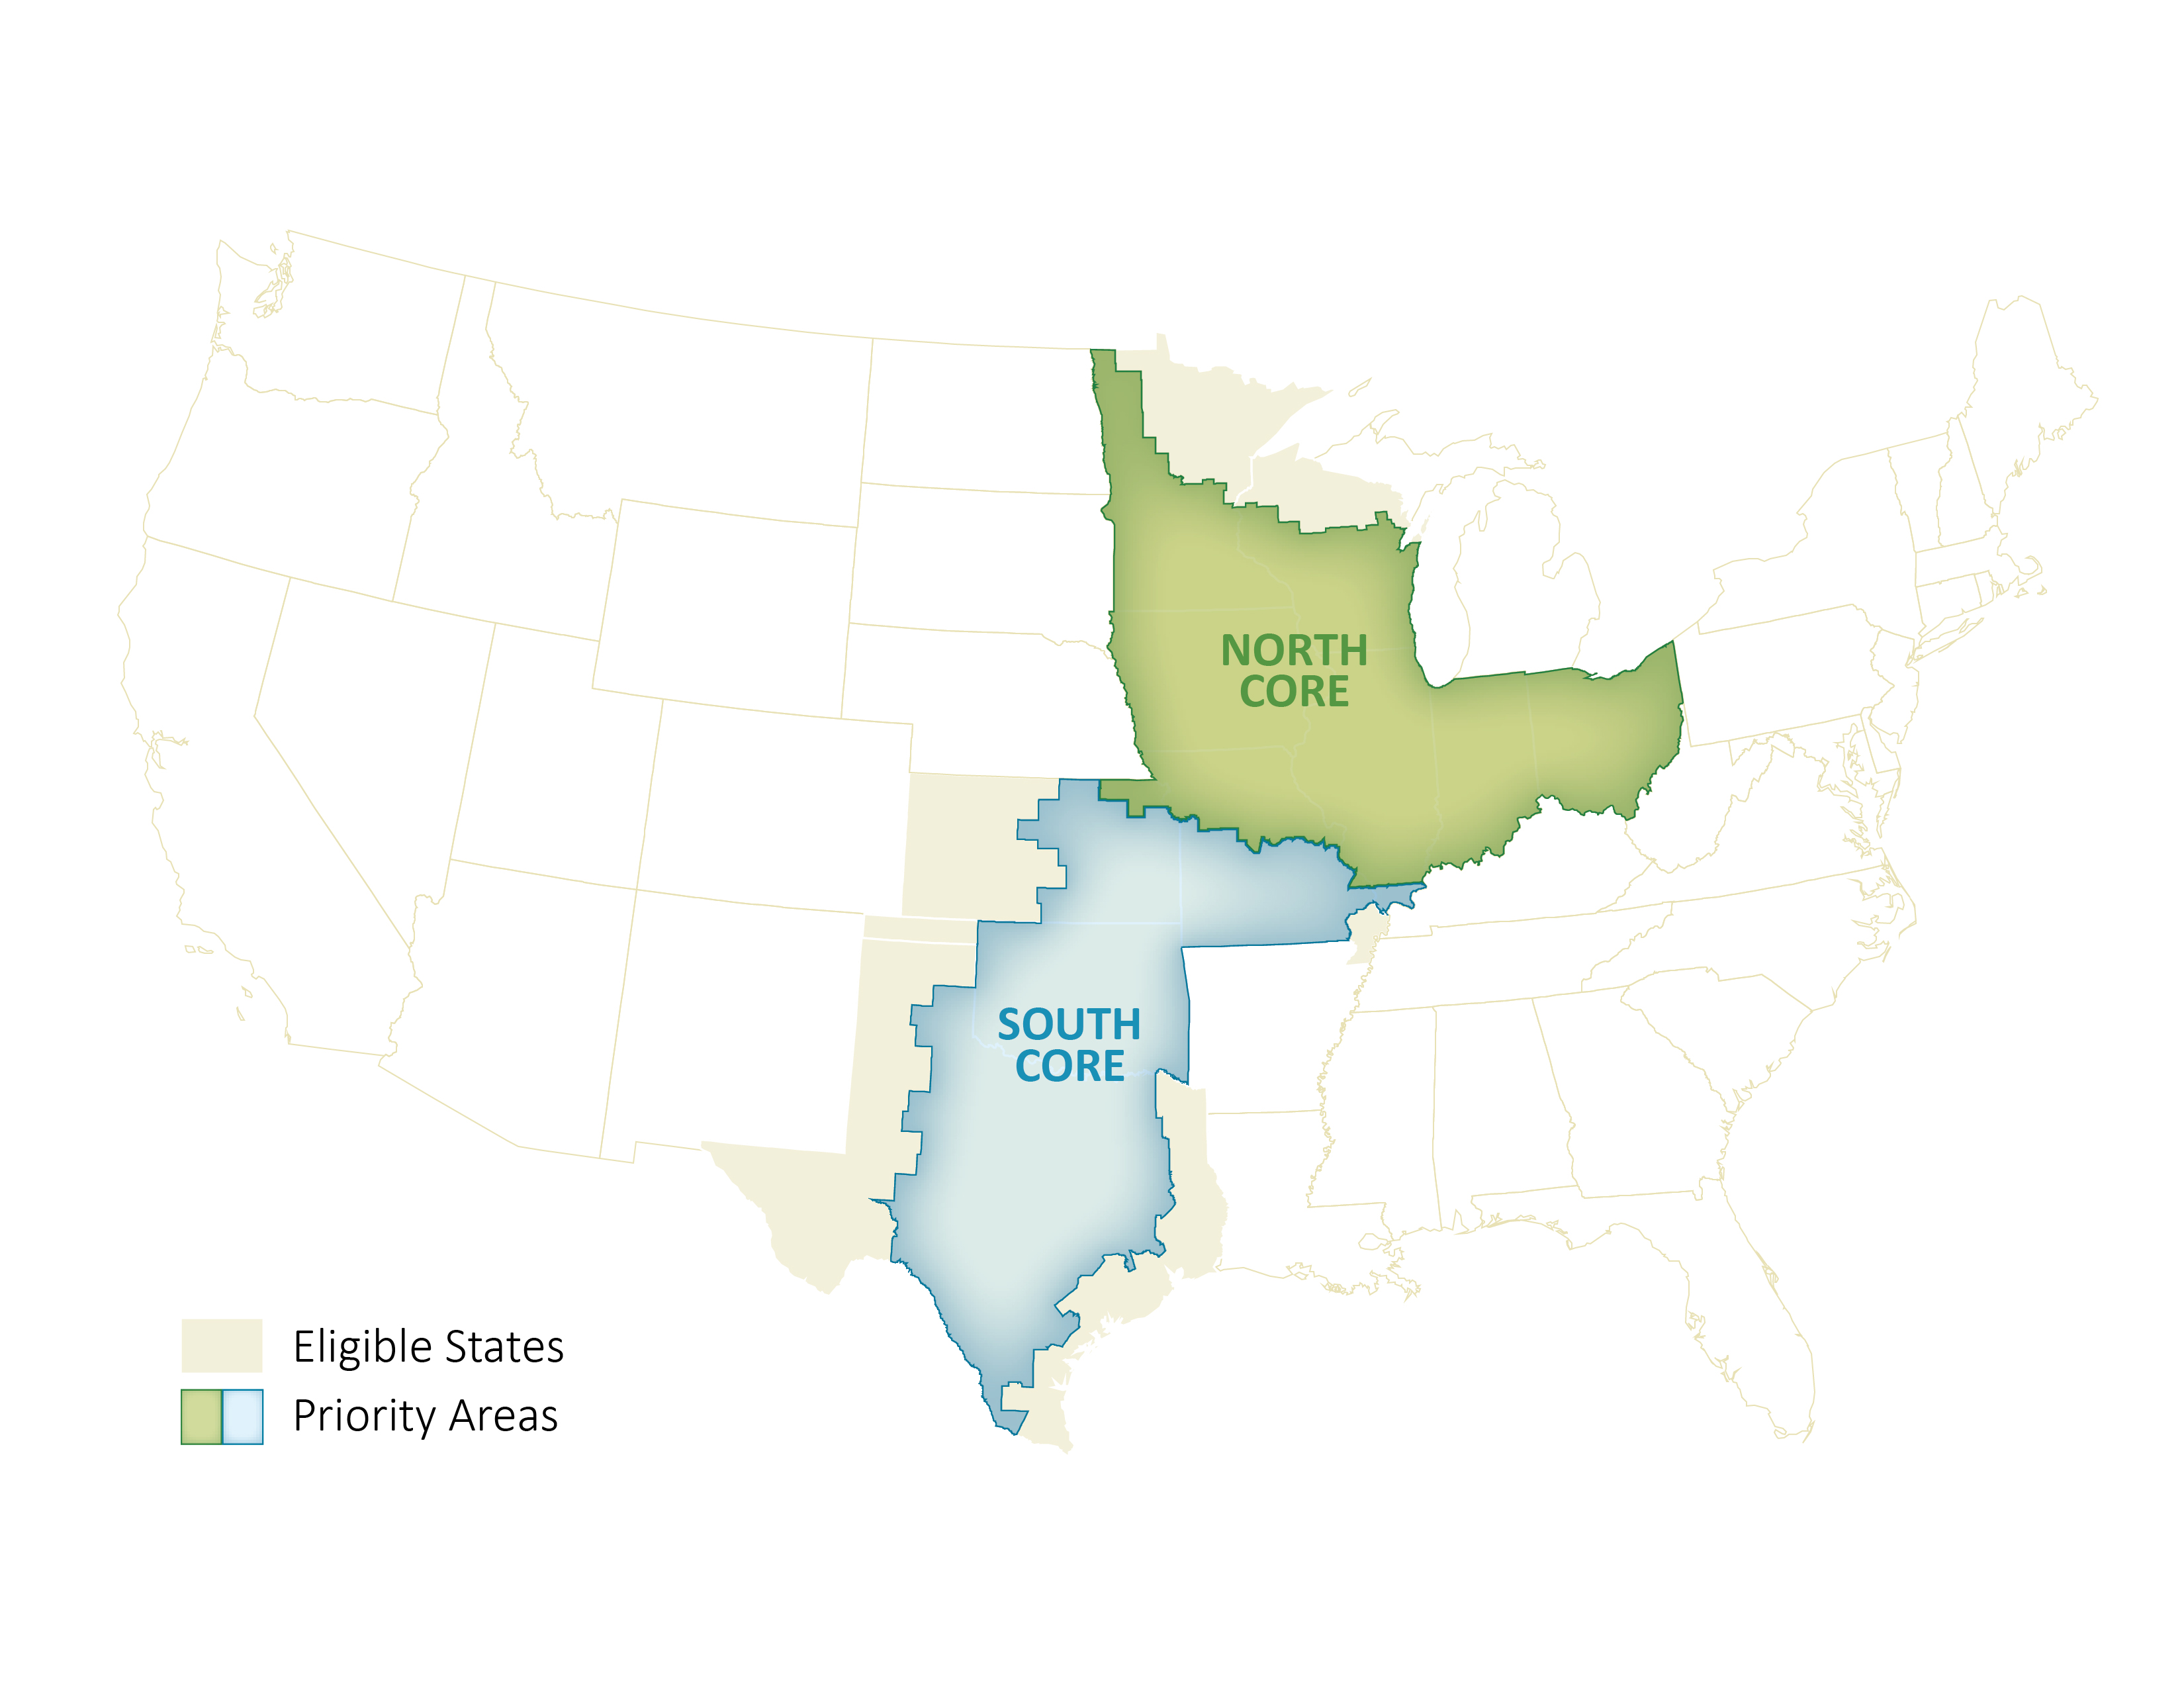 Figure 1 (Below). Technical Assistance Focal Geographies. These focal geographies include partial Monarch Conservation Units defined by the U.S. Fish and Wildlife Service. They represent priority, but not exclusive, areas for NFWF investments in monarch conservation through the category “Technical Assistance for Private Working Lands.”